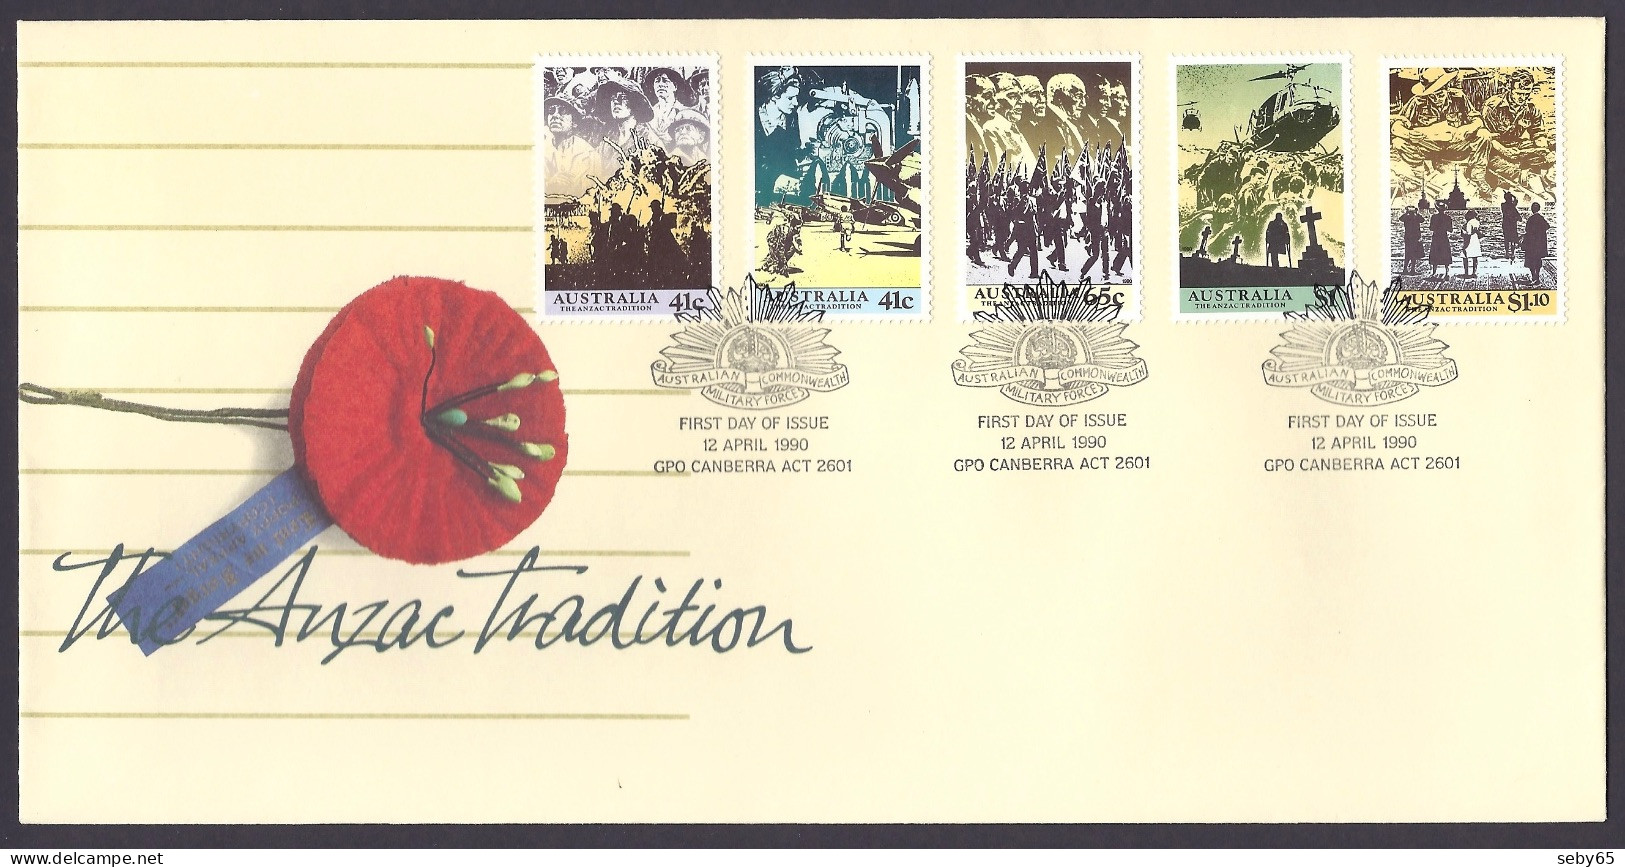 Australia 1990 - The Anzac Tradition, War, Troops, Landing, Army, Military - FDC - Sobre Primer Día (FDC)